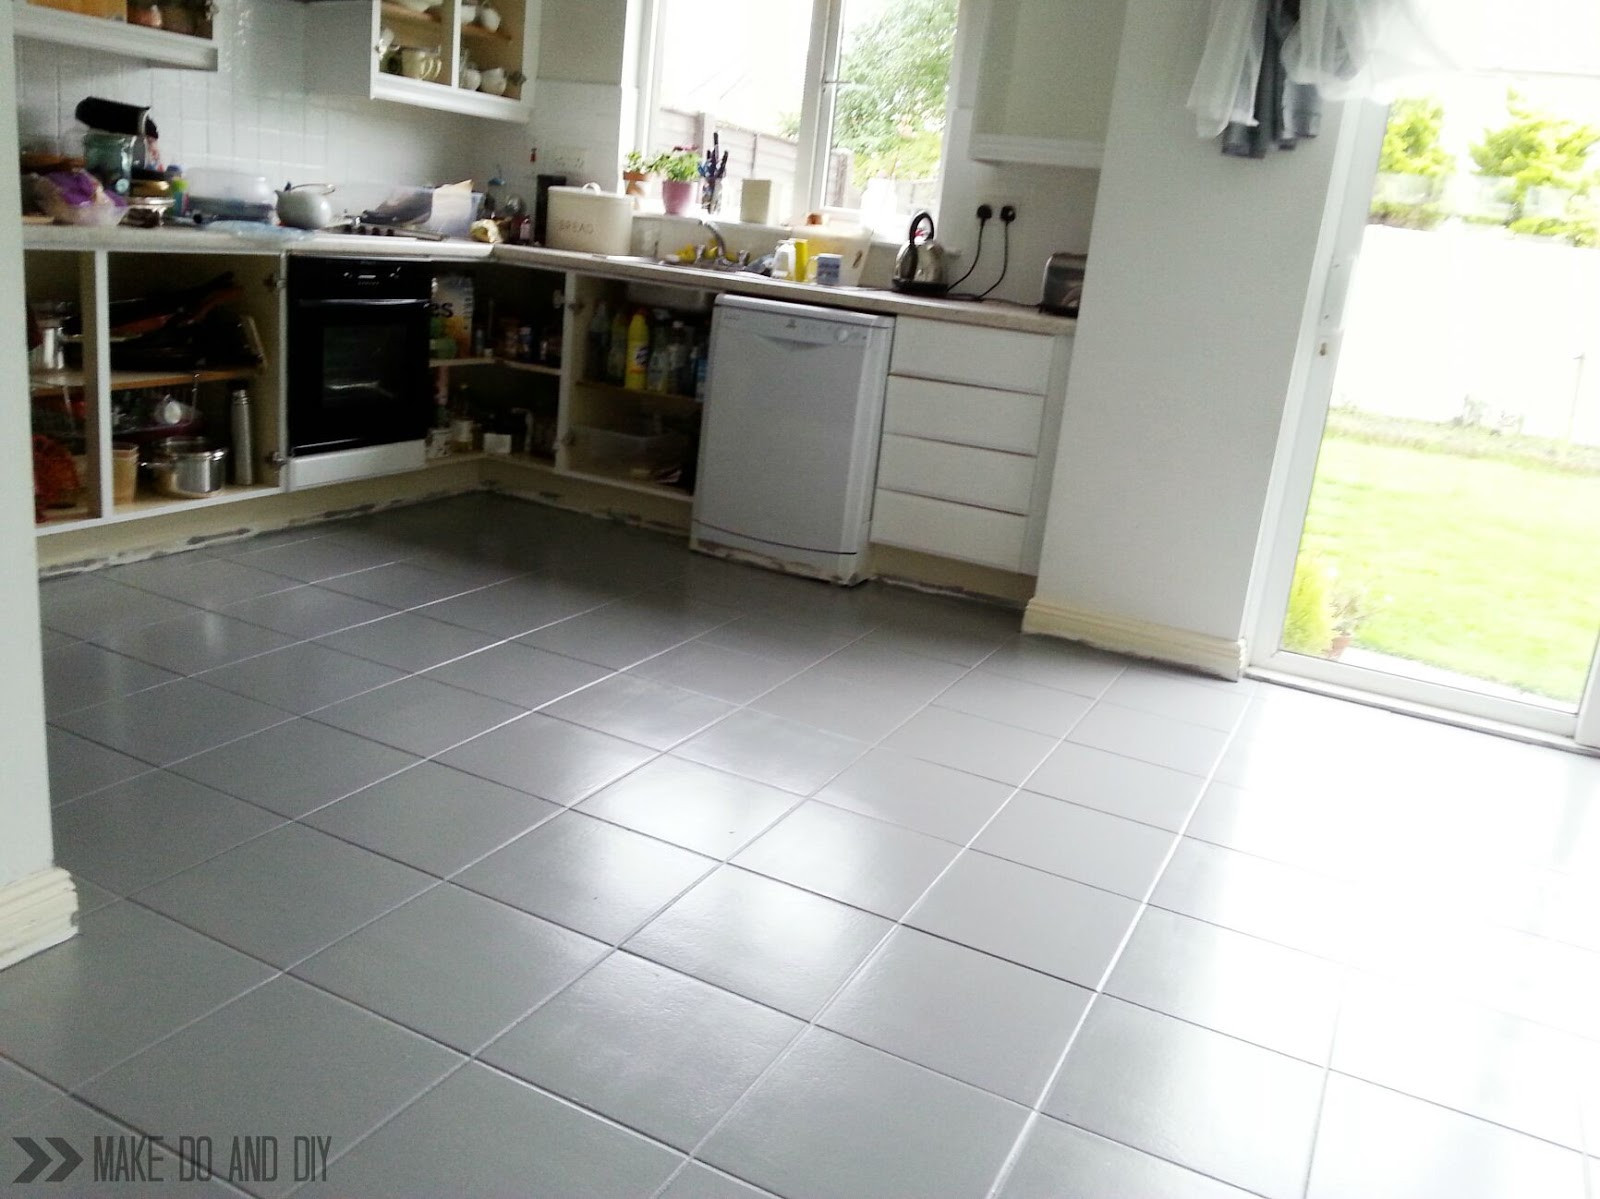 Painting Kitchen Tile Floor
 painted tile floor no really Make Do and DIY